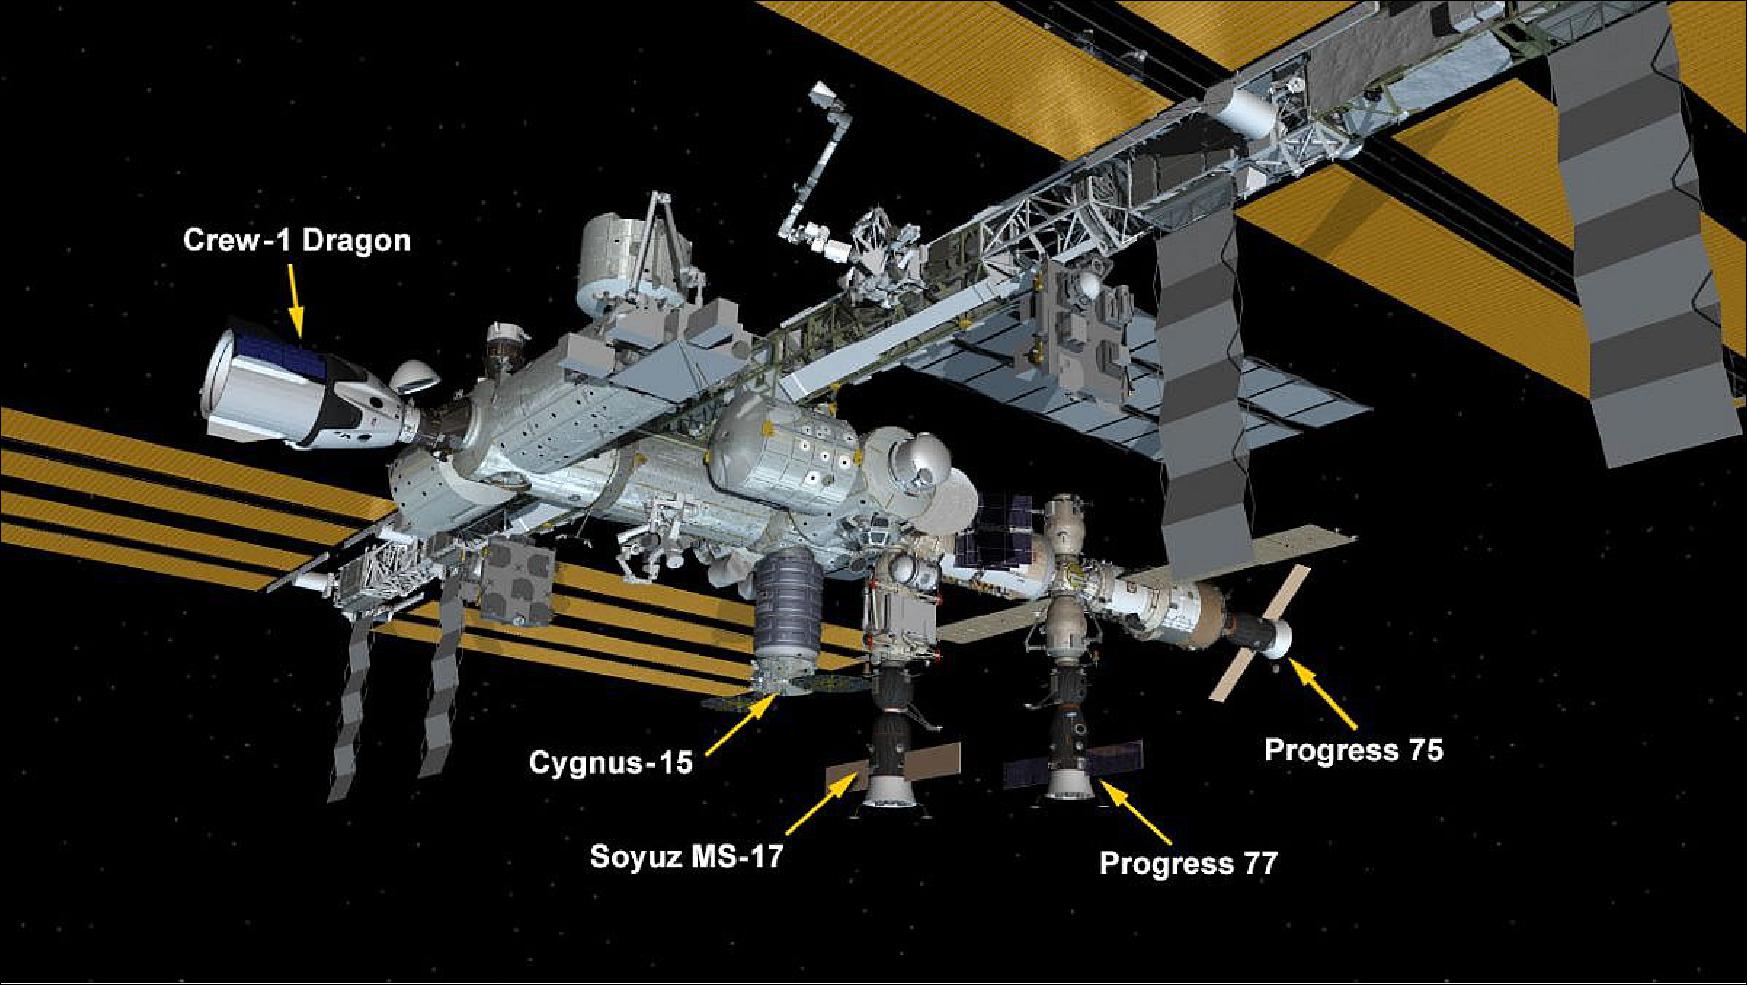 Figure 7: February 22, 2021: International Space Station Configuration. Five spaceships are attached to the space station including the SpaceX Crew Dragon, the Northrop Grumman Cygnus-15 cargo craft, and Russia's Progress 76 and 77 resupply ships and Soyuz MS-17 crew ship (image credit: NASA)